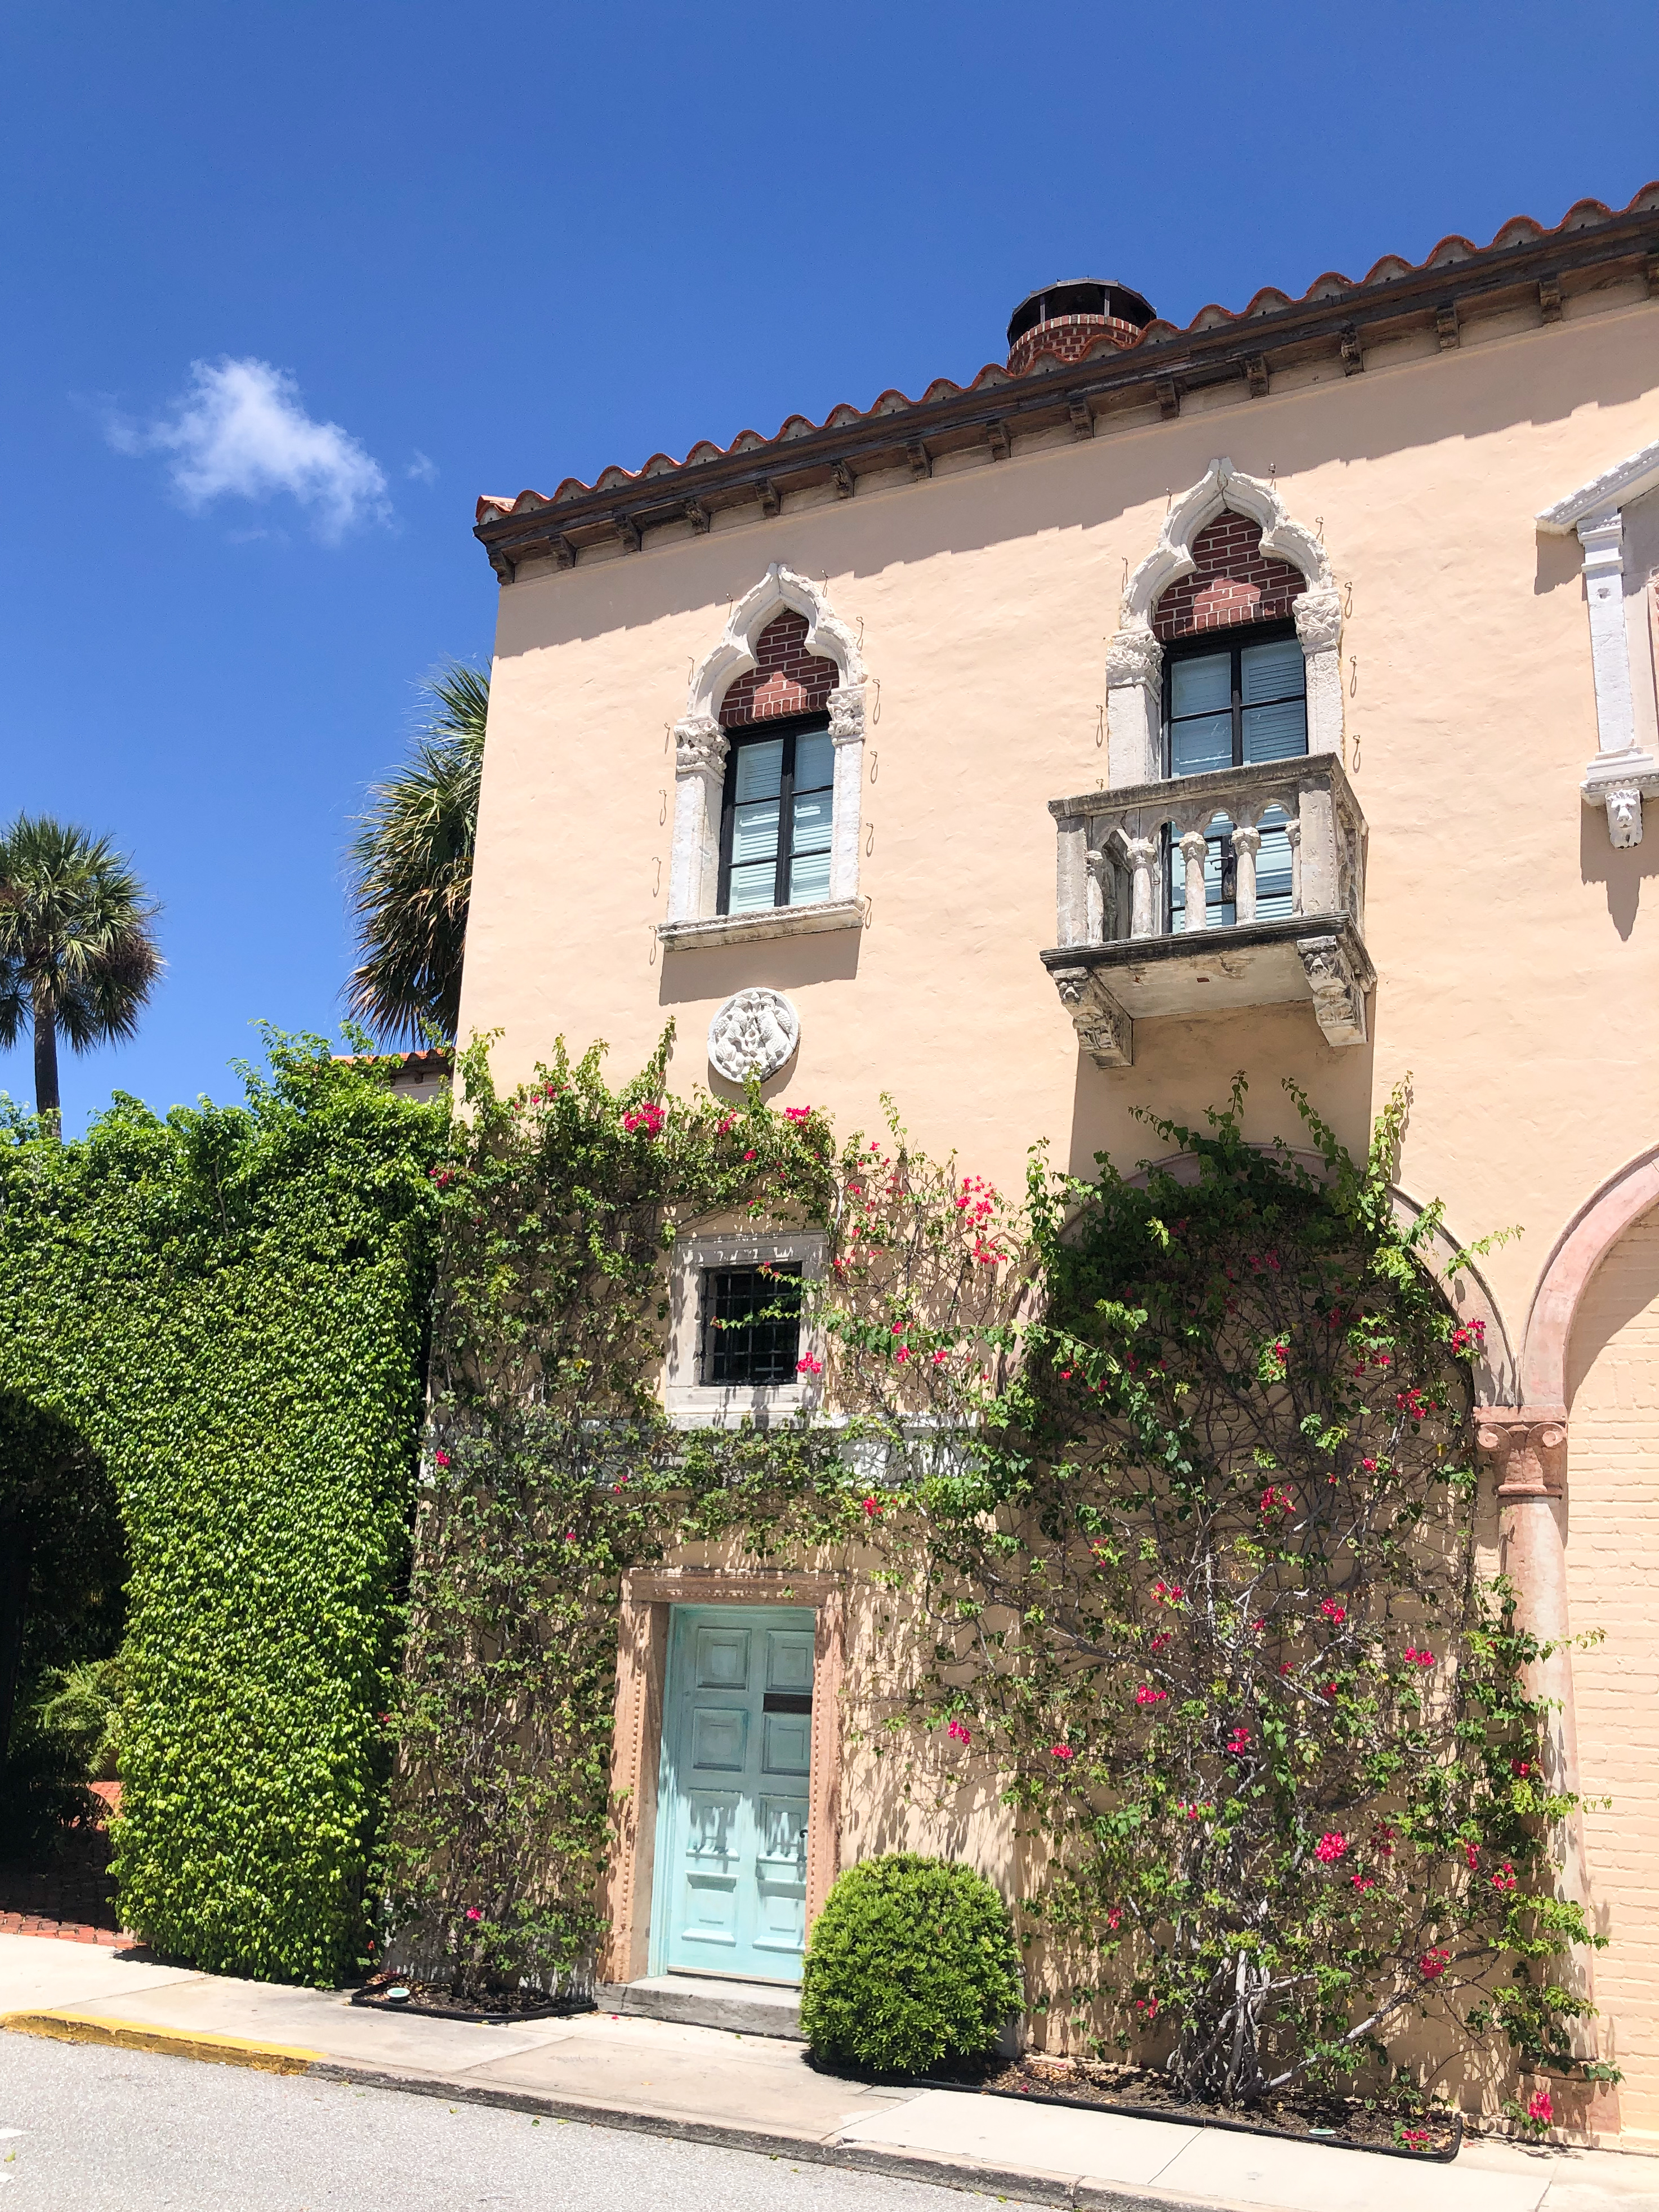 24 Hour Palm Beach Travel Guide / Palm Beach Lake Trail / Palm Beach, Florida / Palm Beach Style / Worth Avenue - Sunshine Style, A Classica and Coastal Style and Lifestyle Blog by Katie 